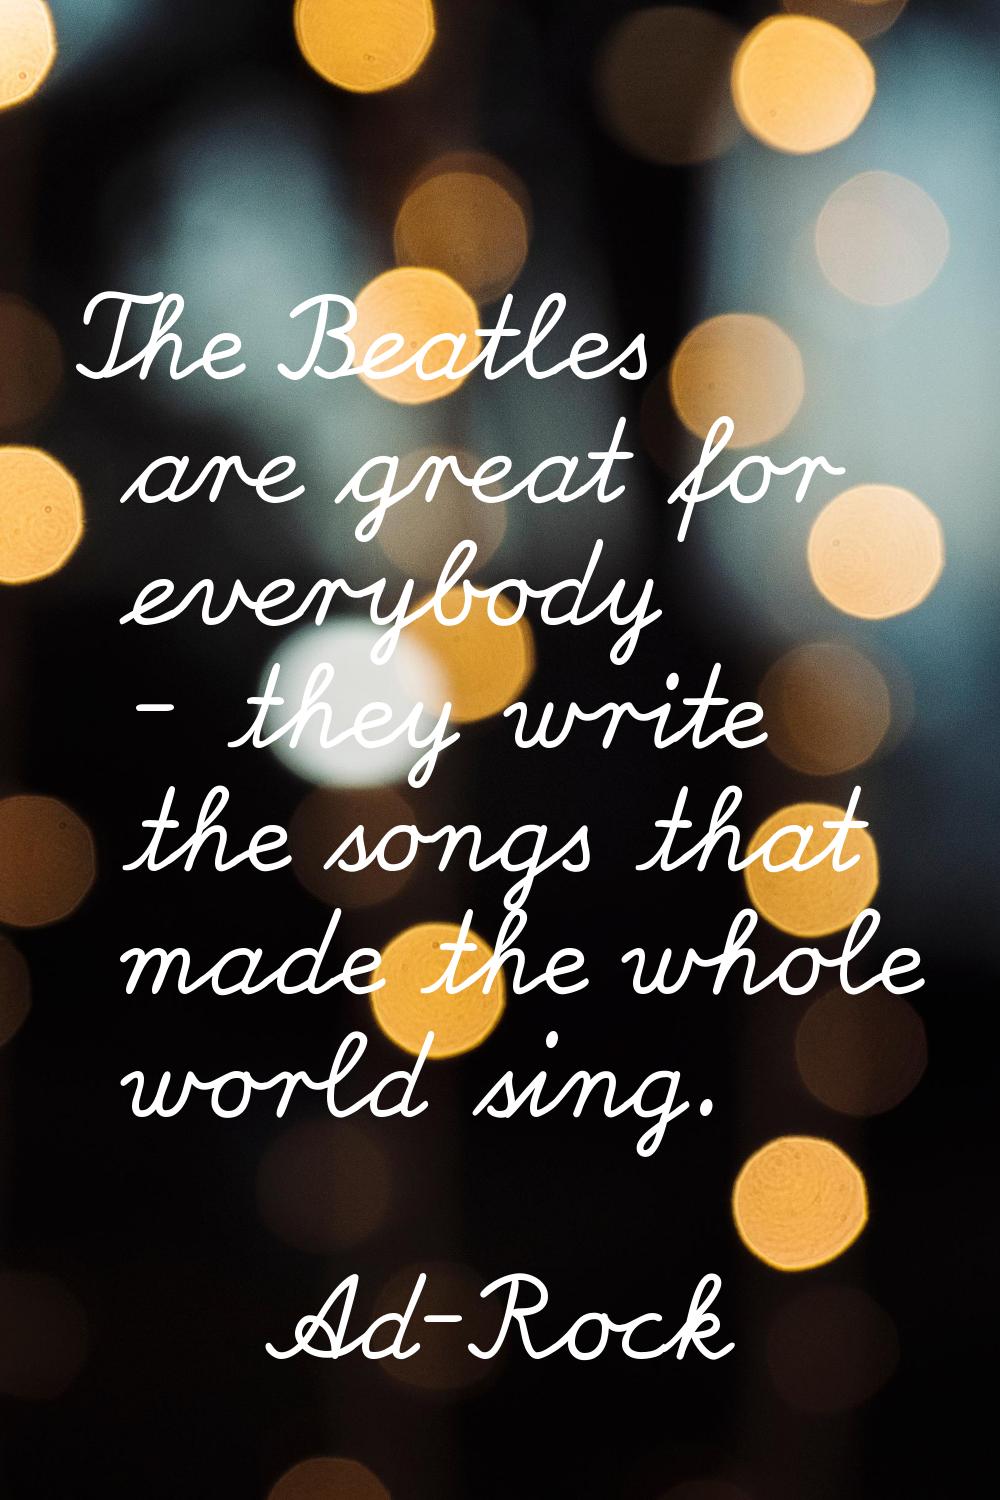 The Beatles are great for everybody - they write the songs that made the whole world sing.